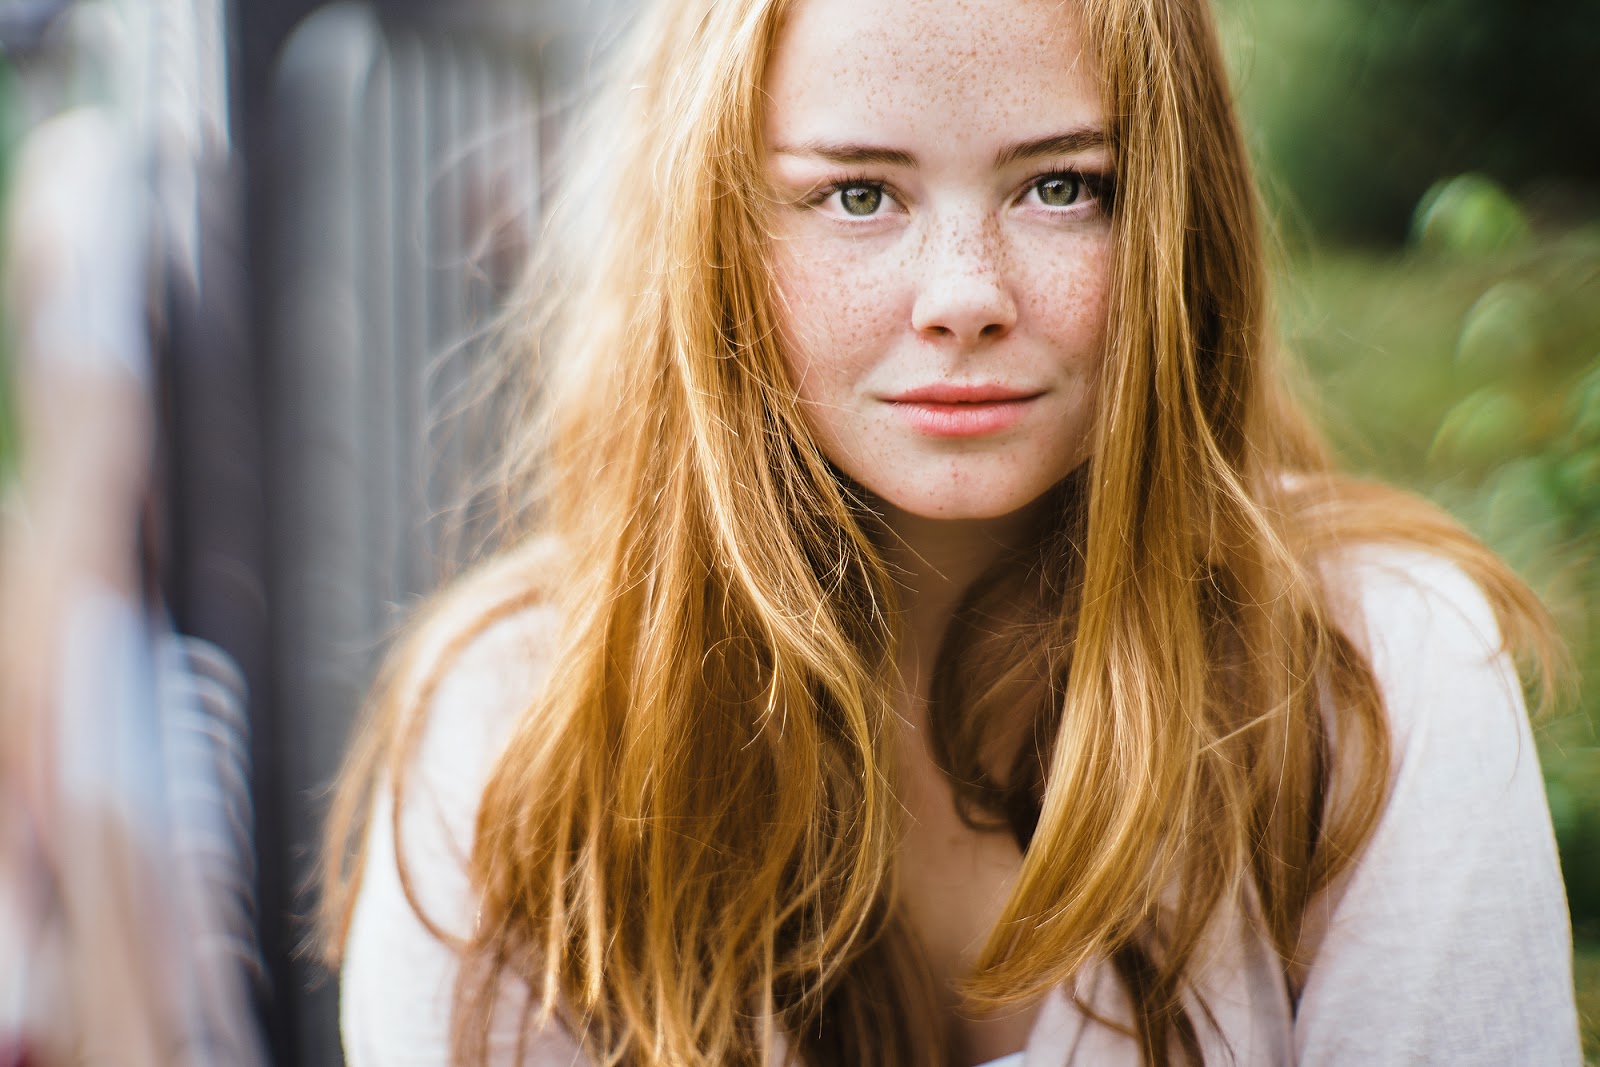 Canon 50mm 0.95 dreamlens portrait of a red  head girl with freckles by Willie Kers